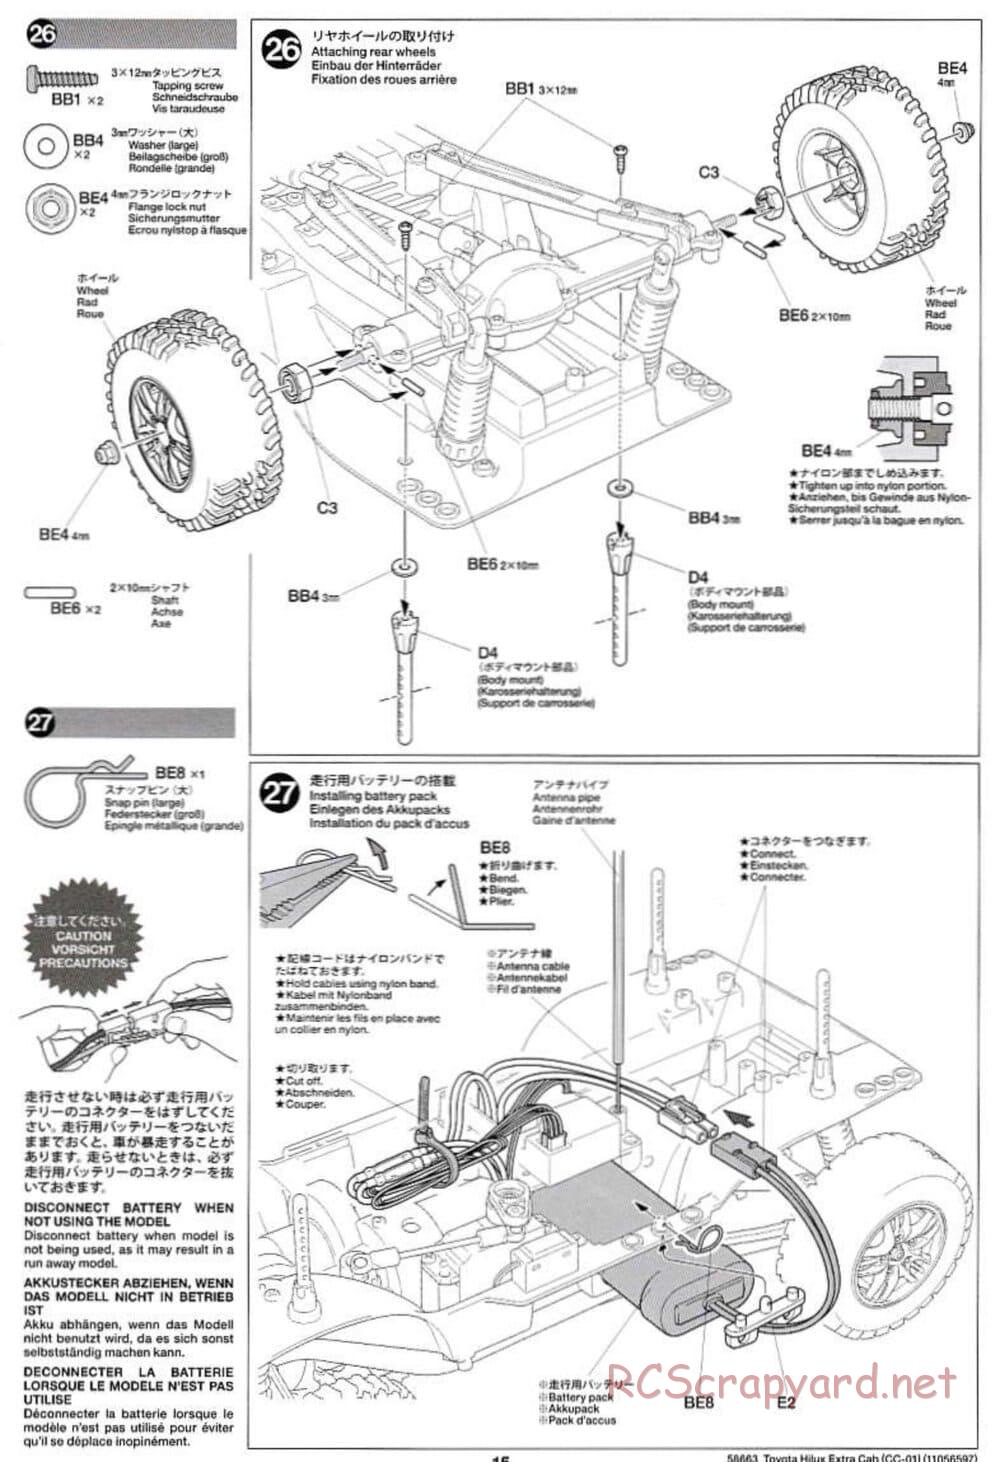 Tamiya - Toyota Hilux Extra Cab - CC-01 Chassis - Manual - Page 15